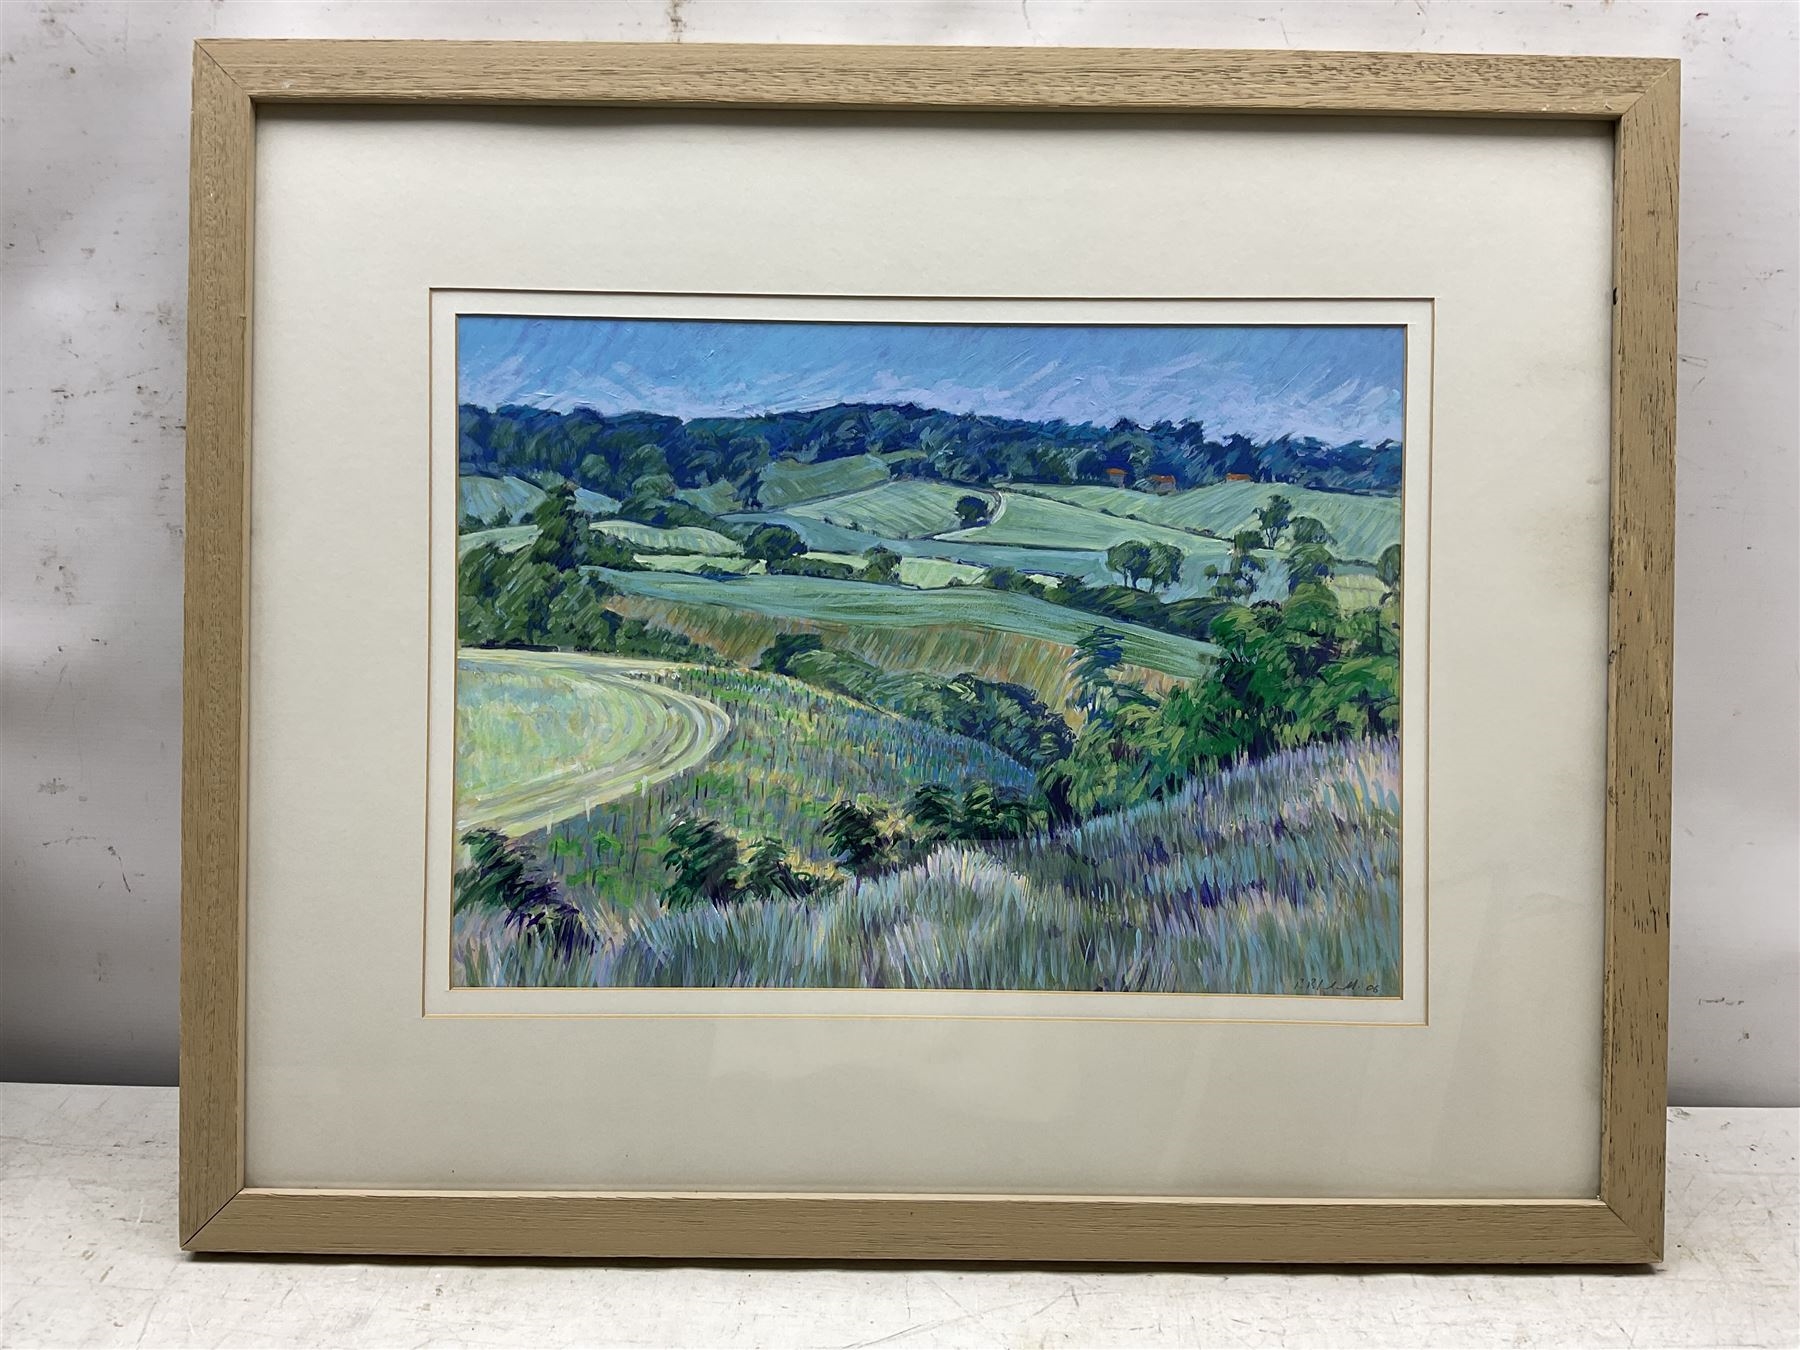 Artwork by Paul Blackwell, 'The New Plantation - Esk Valley', Made of acrylic